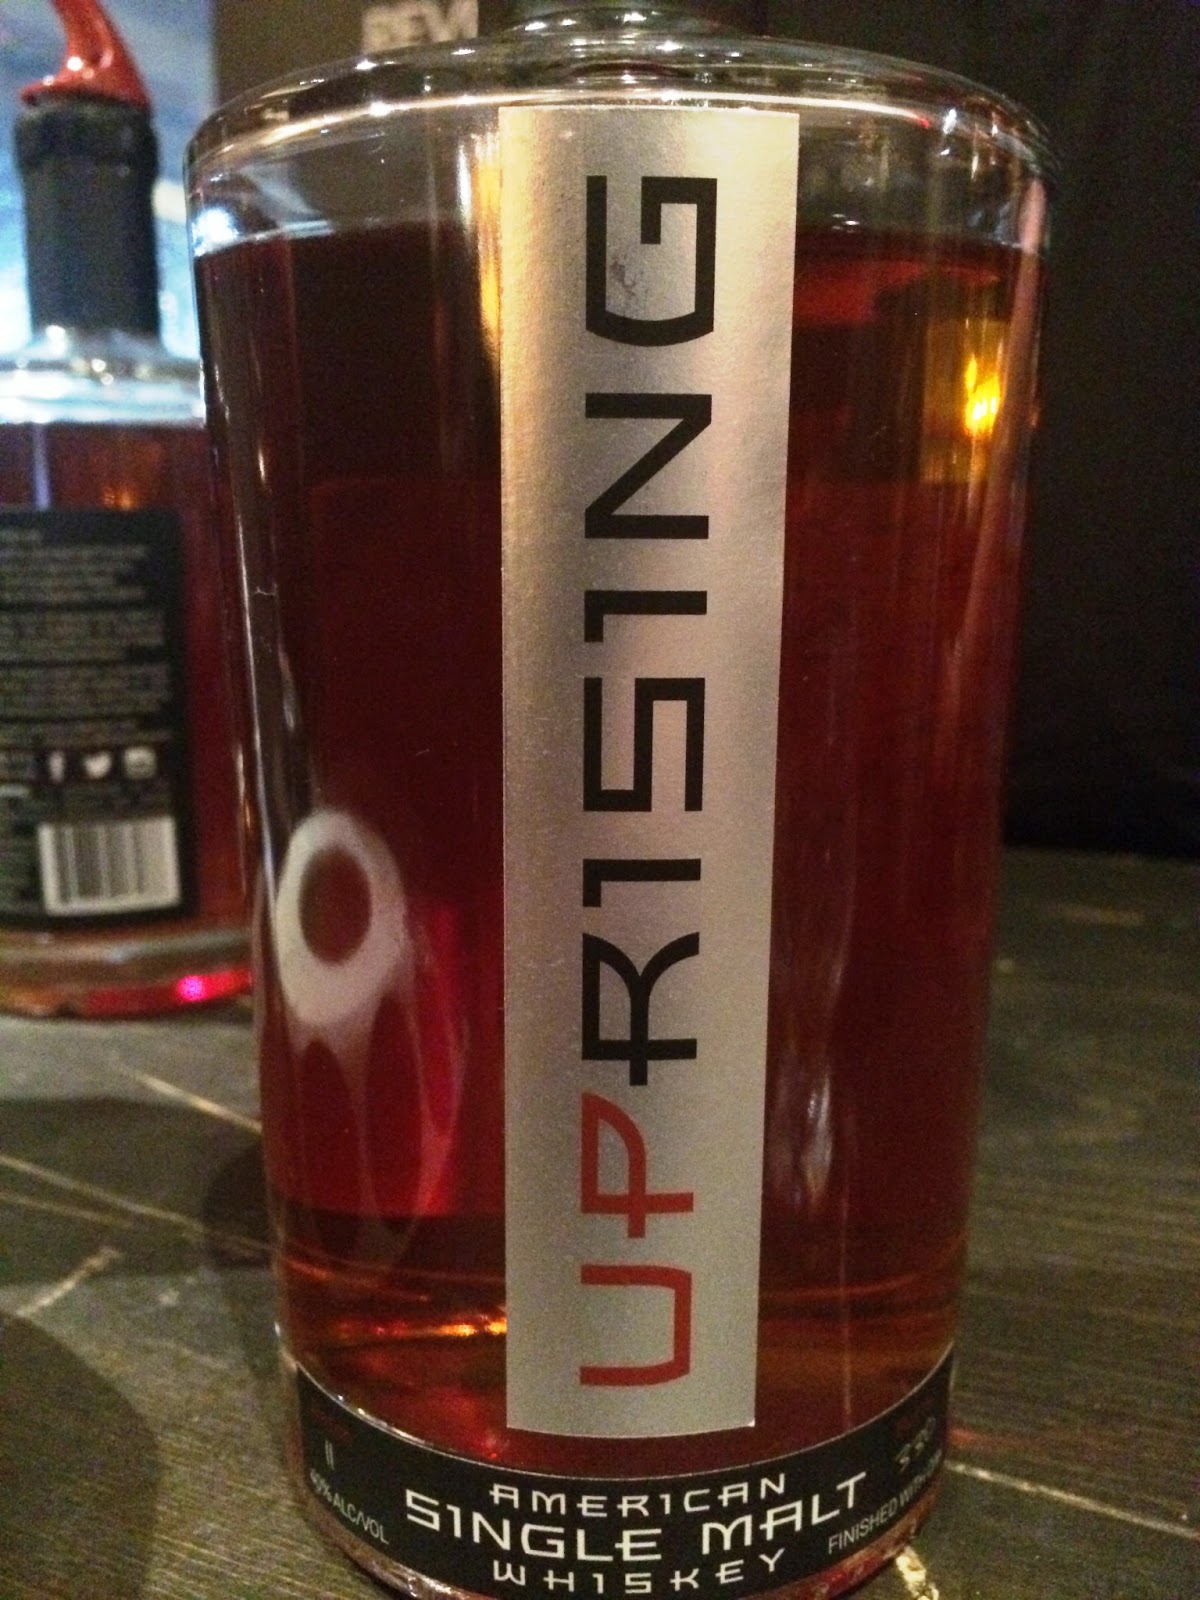 East Coast Wineries: Uprising American Single Malt Whiskey From Sons of Liberty Distilling (RI)